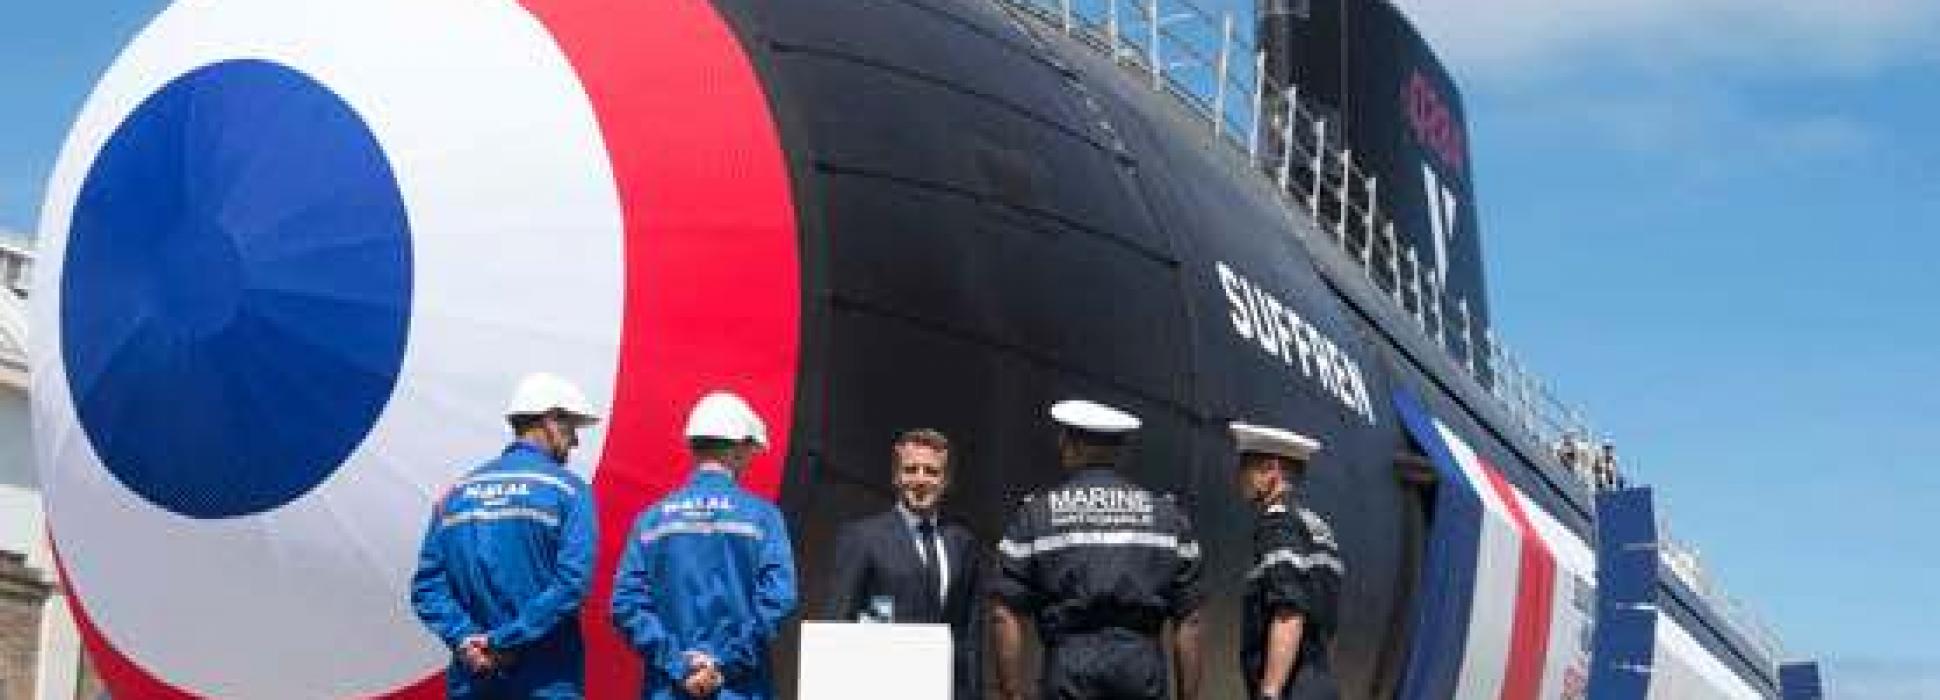 On July 12, 2019 in Cherbourg, President Emmanuel Macron inaugurated the Suffren, first Barracuda-class submarine